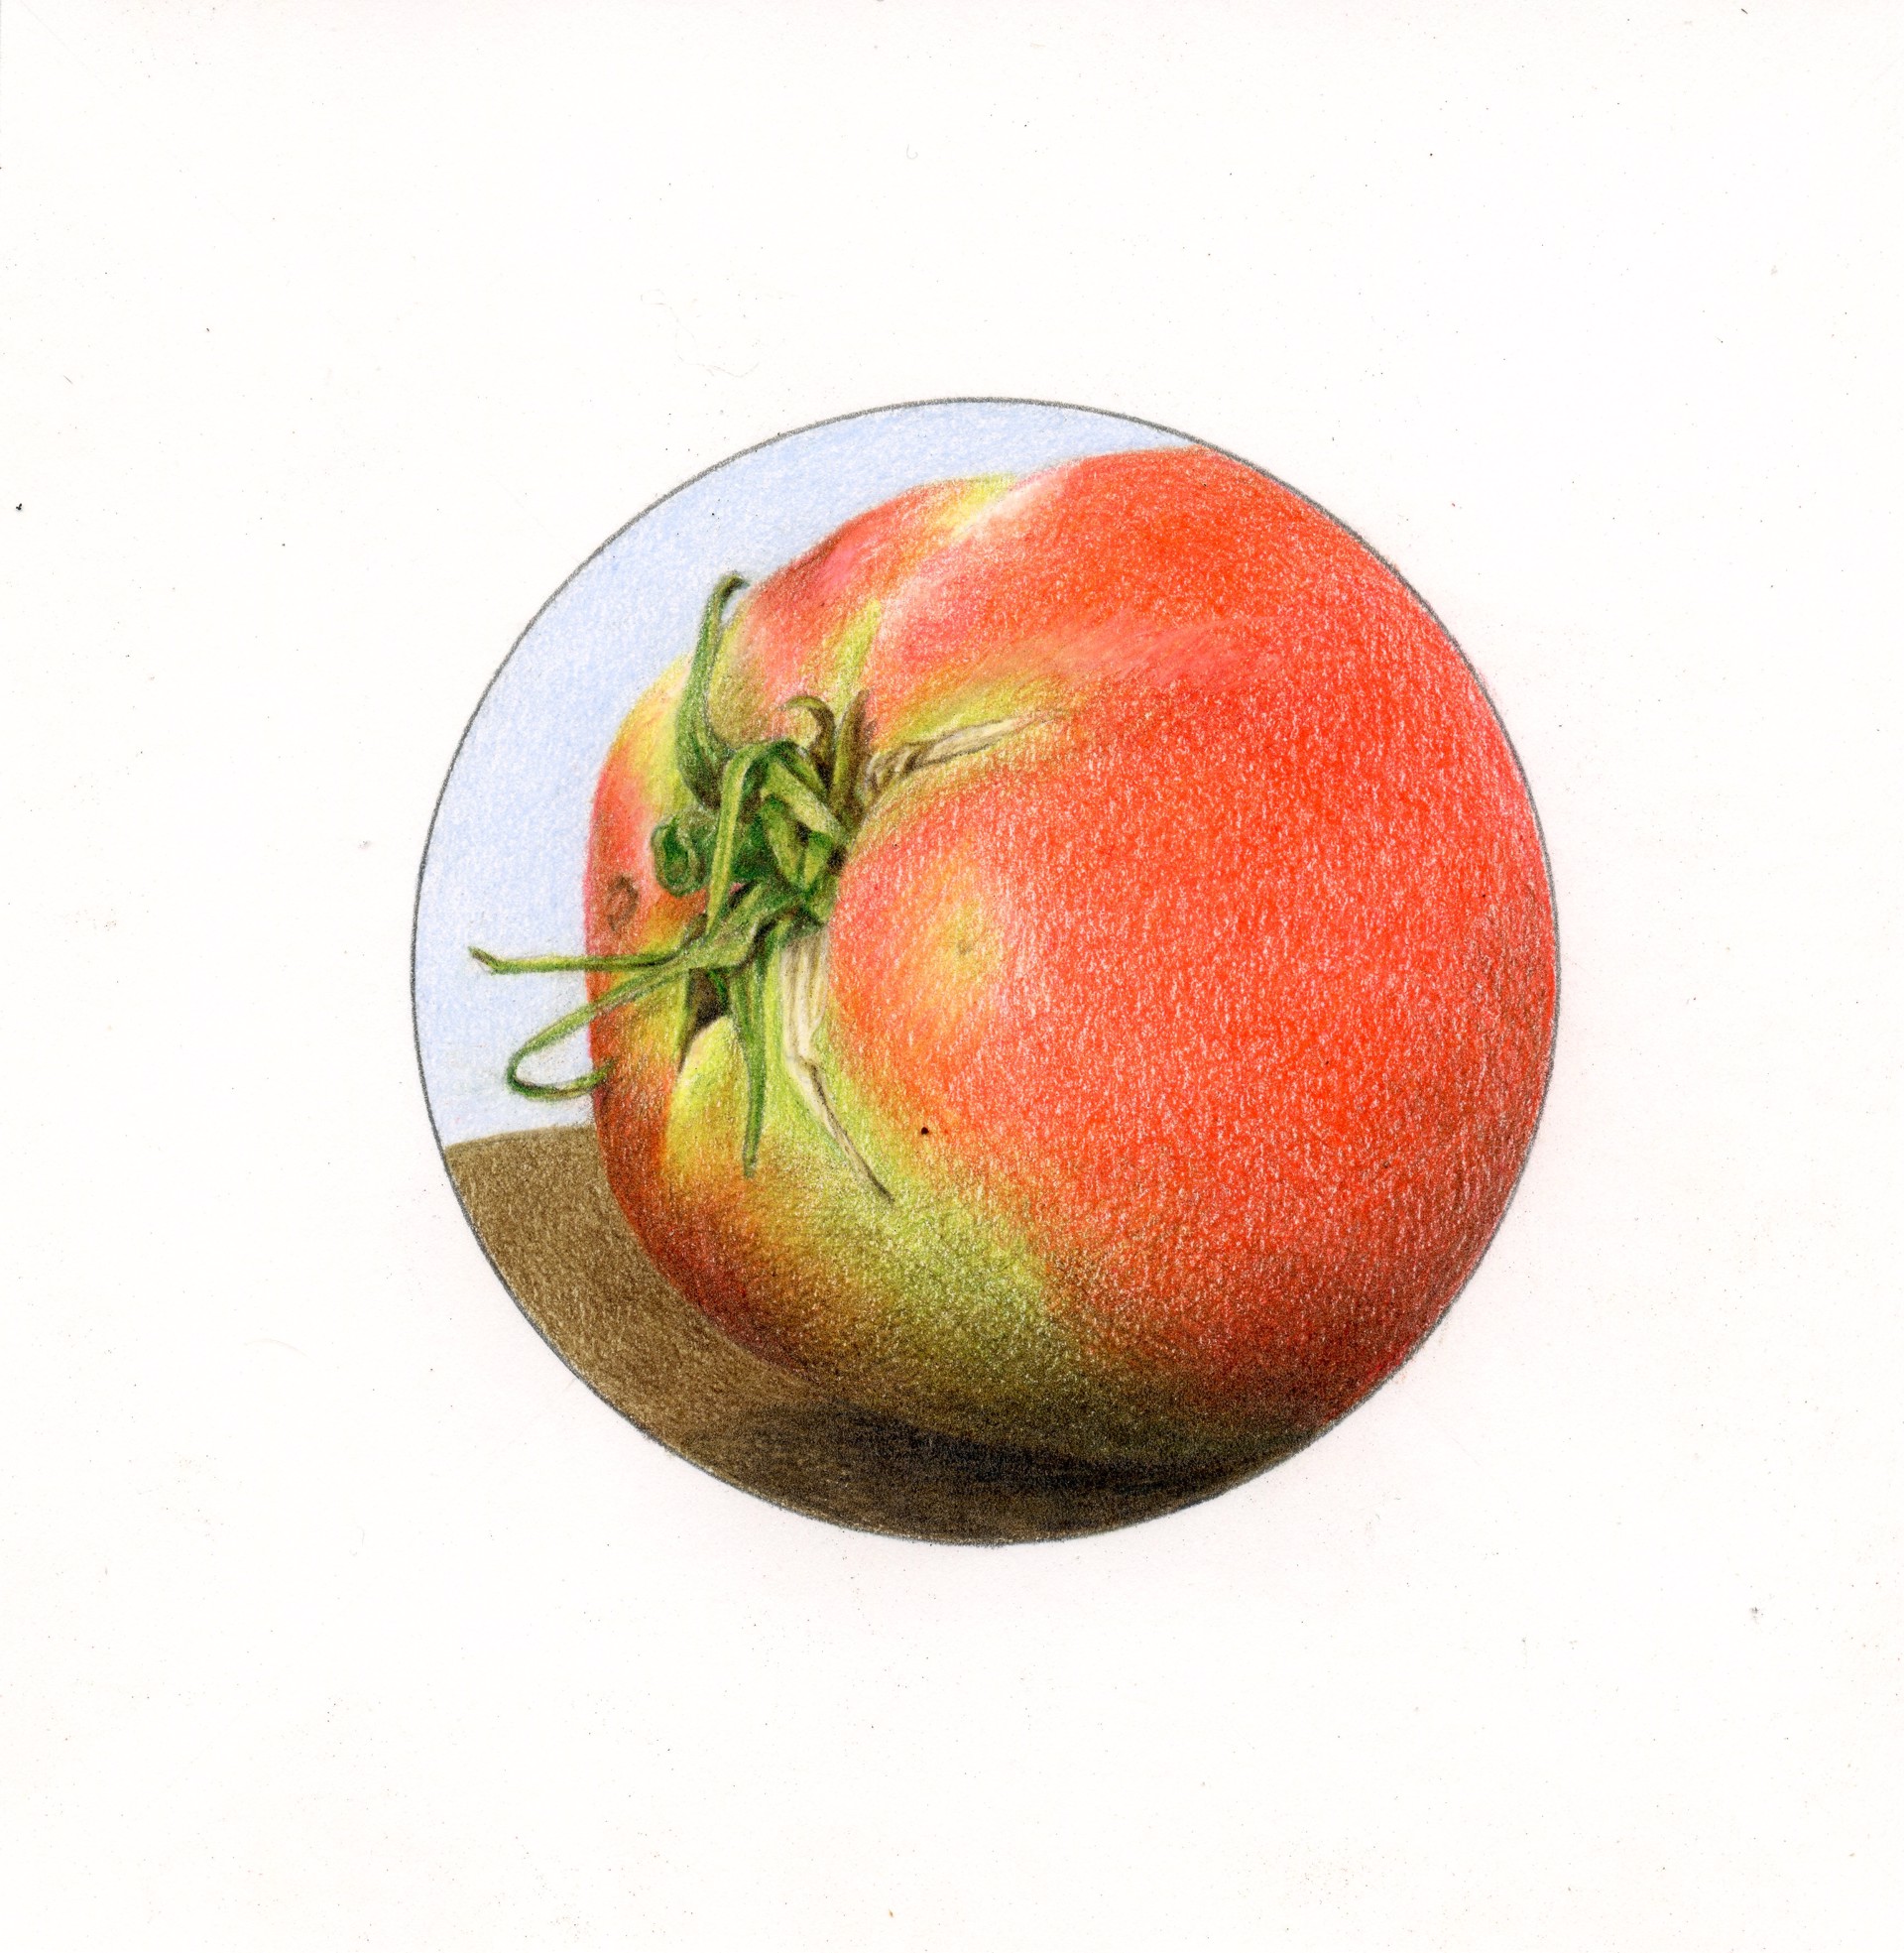 Tomato by Mary Lee Eggart